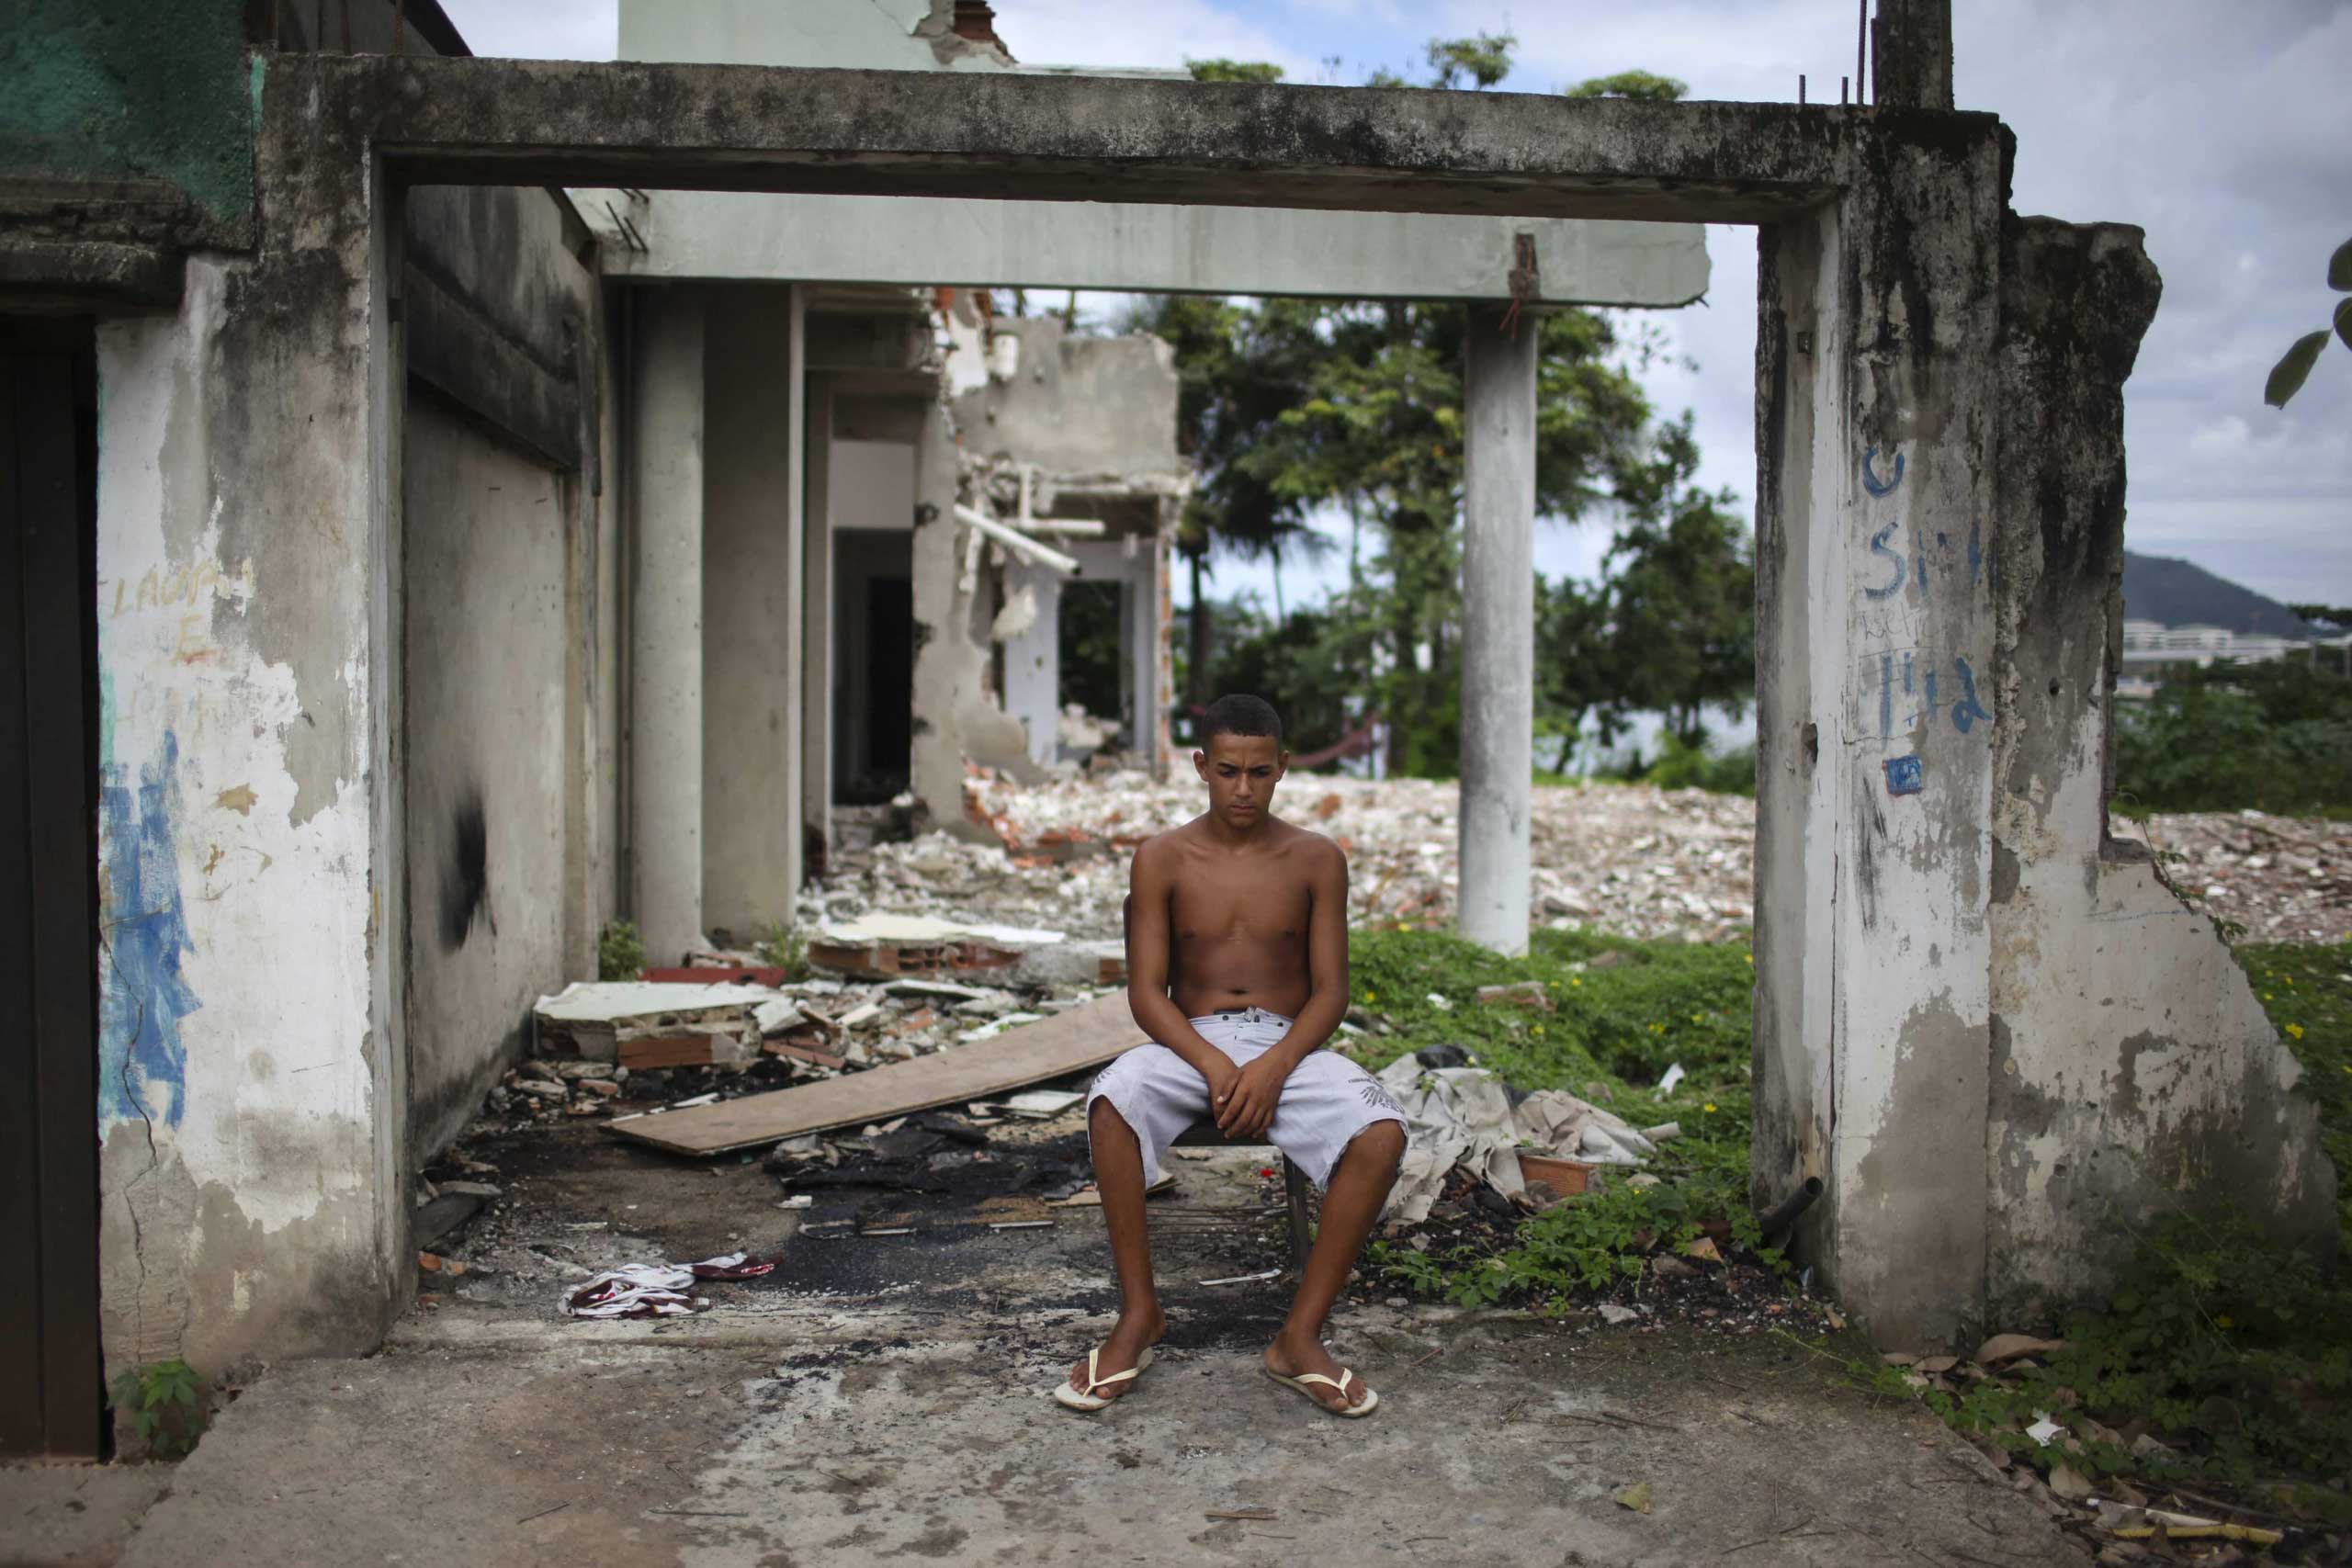 A young man rests next to a destroyed house at the shanty town Vila Autodromo, which is located close to the Olympic Park built for the Olympic Games Rio 2016, in Rio de Janeiro, Brazil, on 01 April 2015.